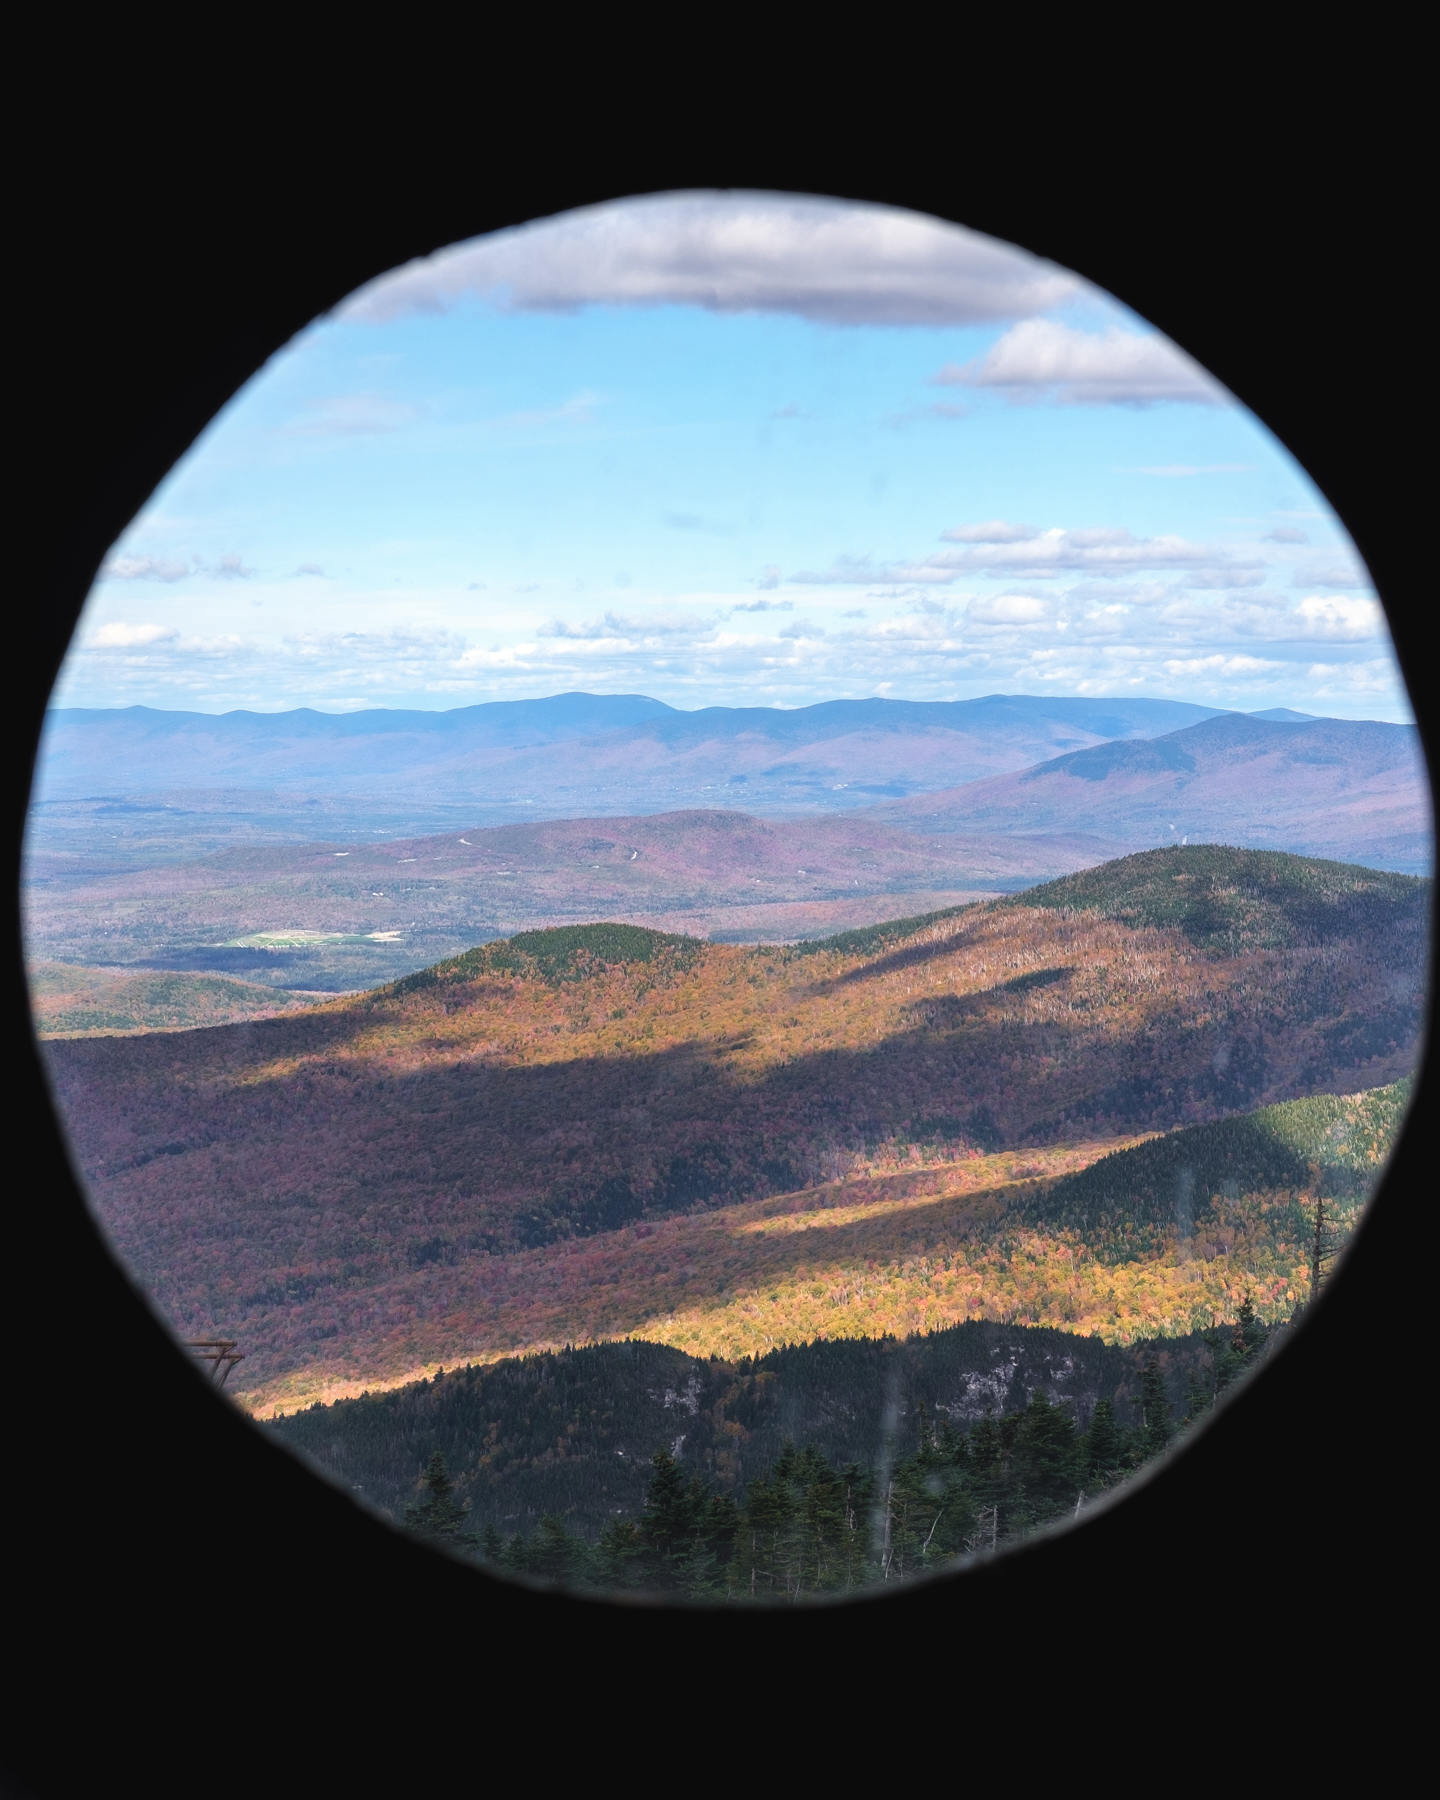 A scenic view of a mountainous landscape with colorful foliage seen through a circular frame.